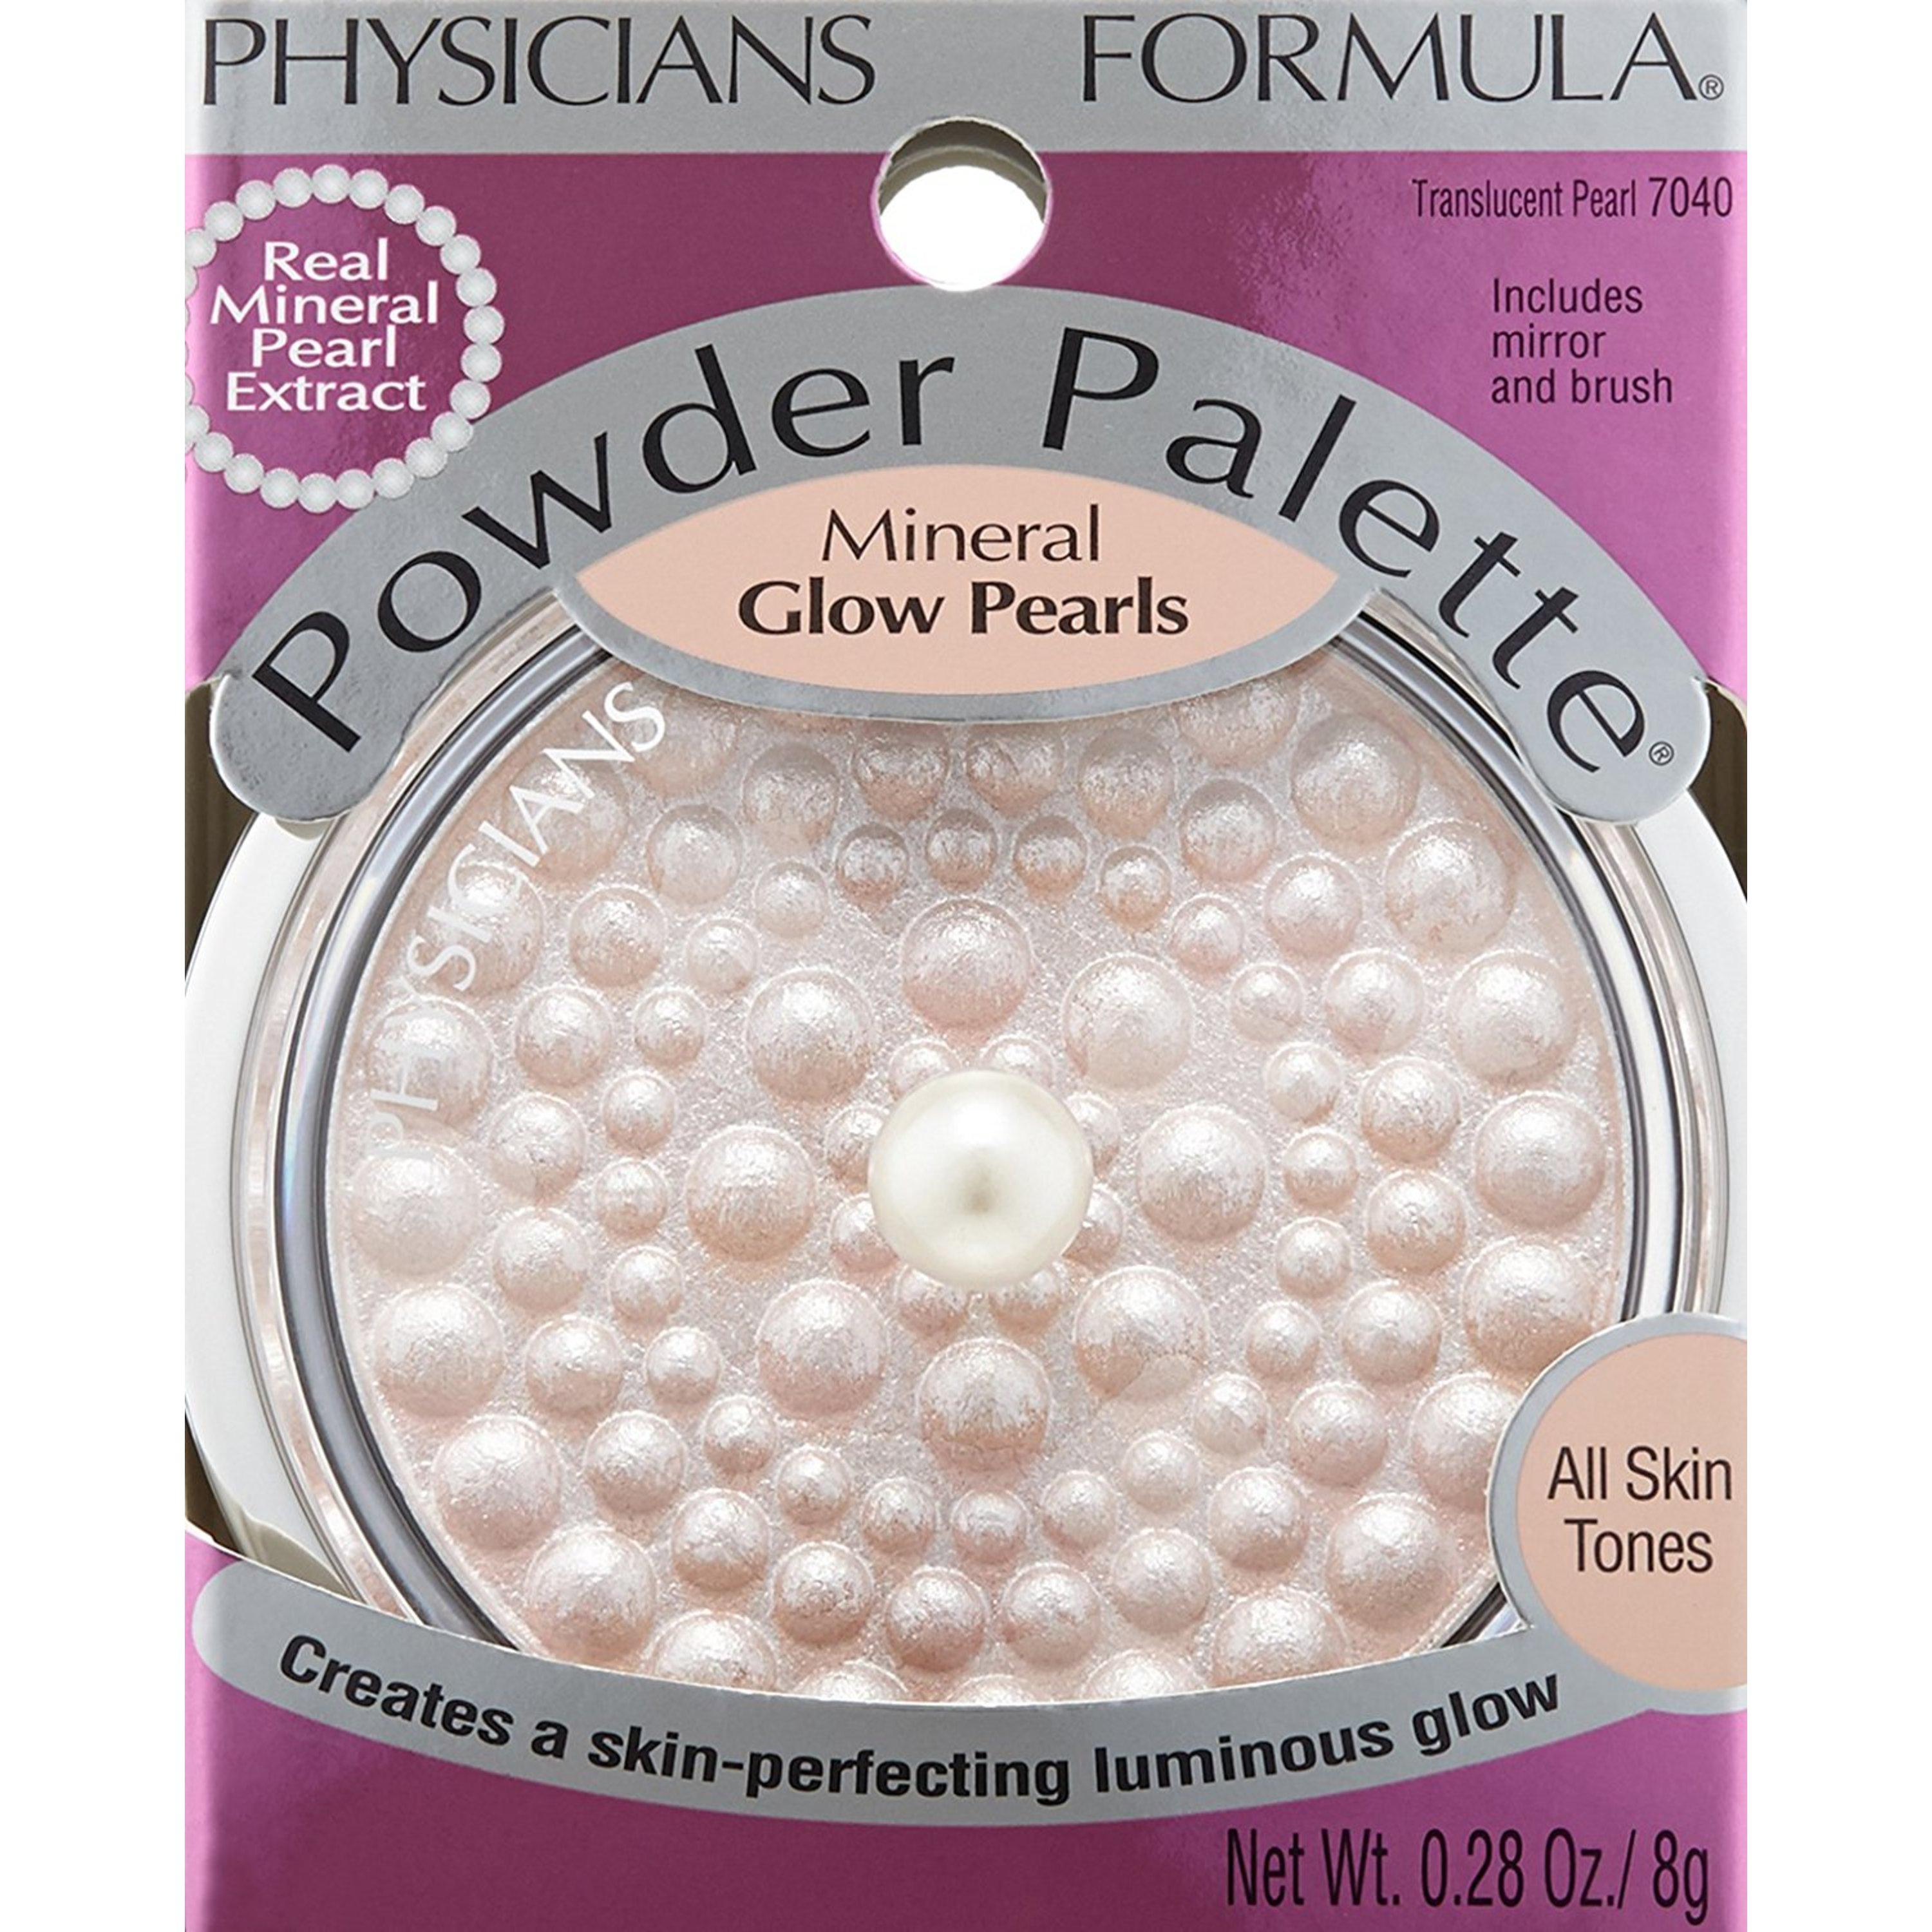 Physicians Formula Powder Palette® Mineral Glow Pearls, Beige Pearl - image 3 of 5